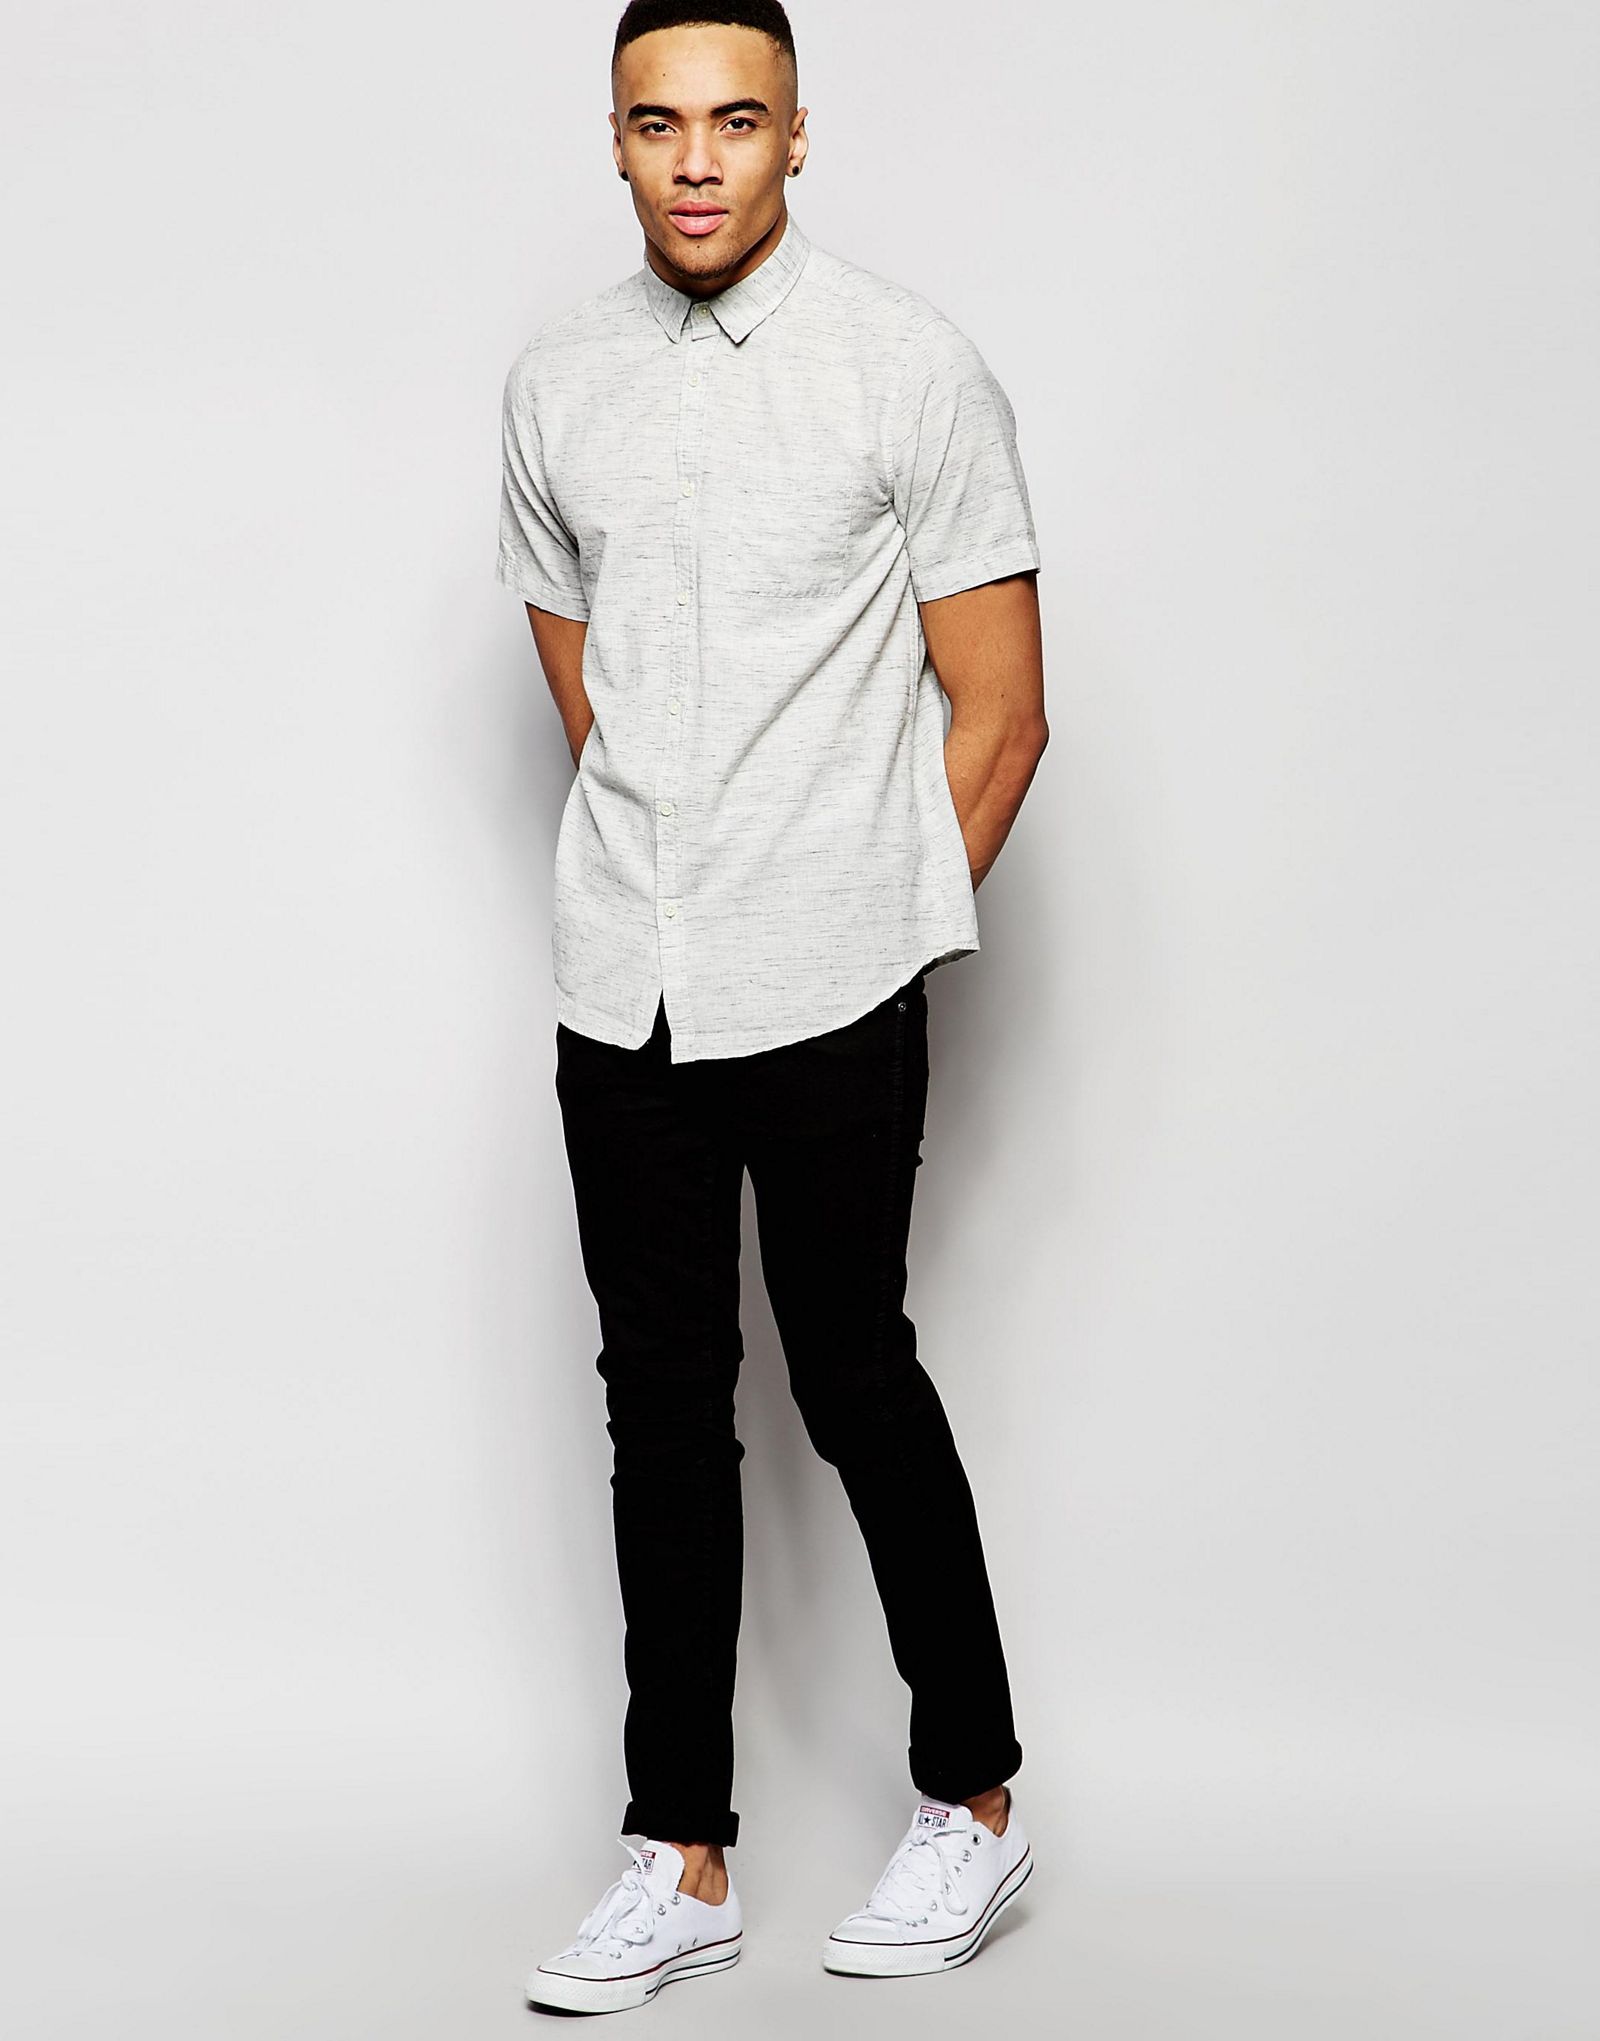 New Look Short Sleeve Shirt With Cream Pattern In Regular Fit